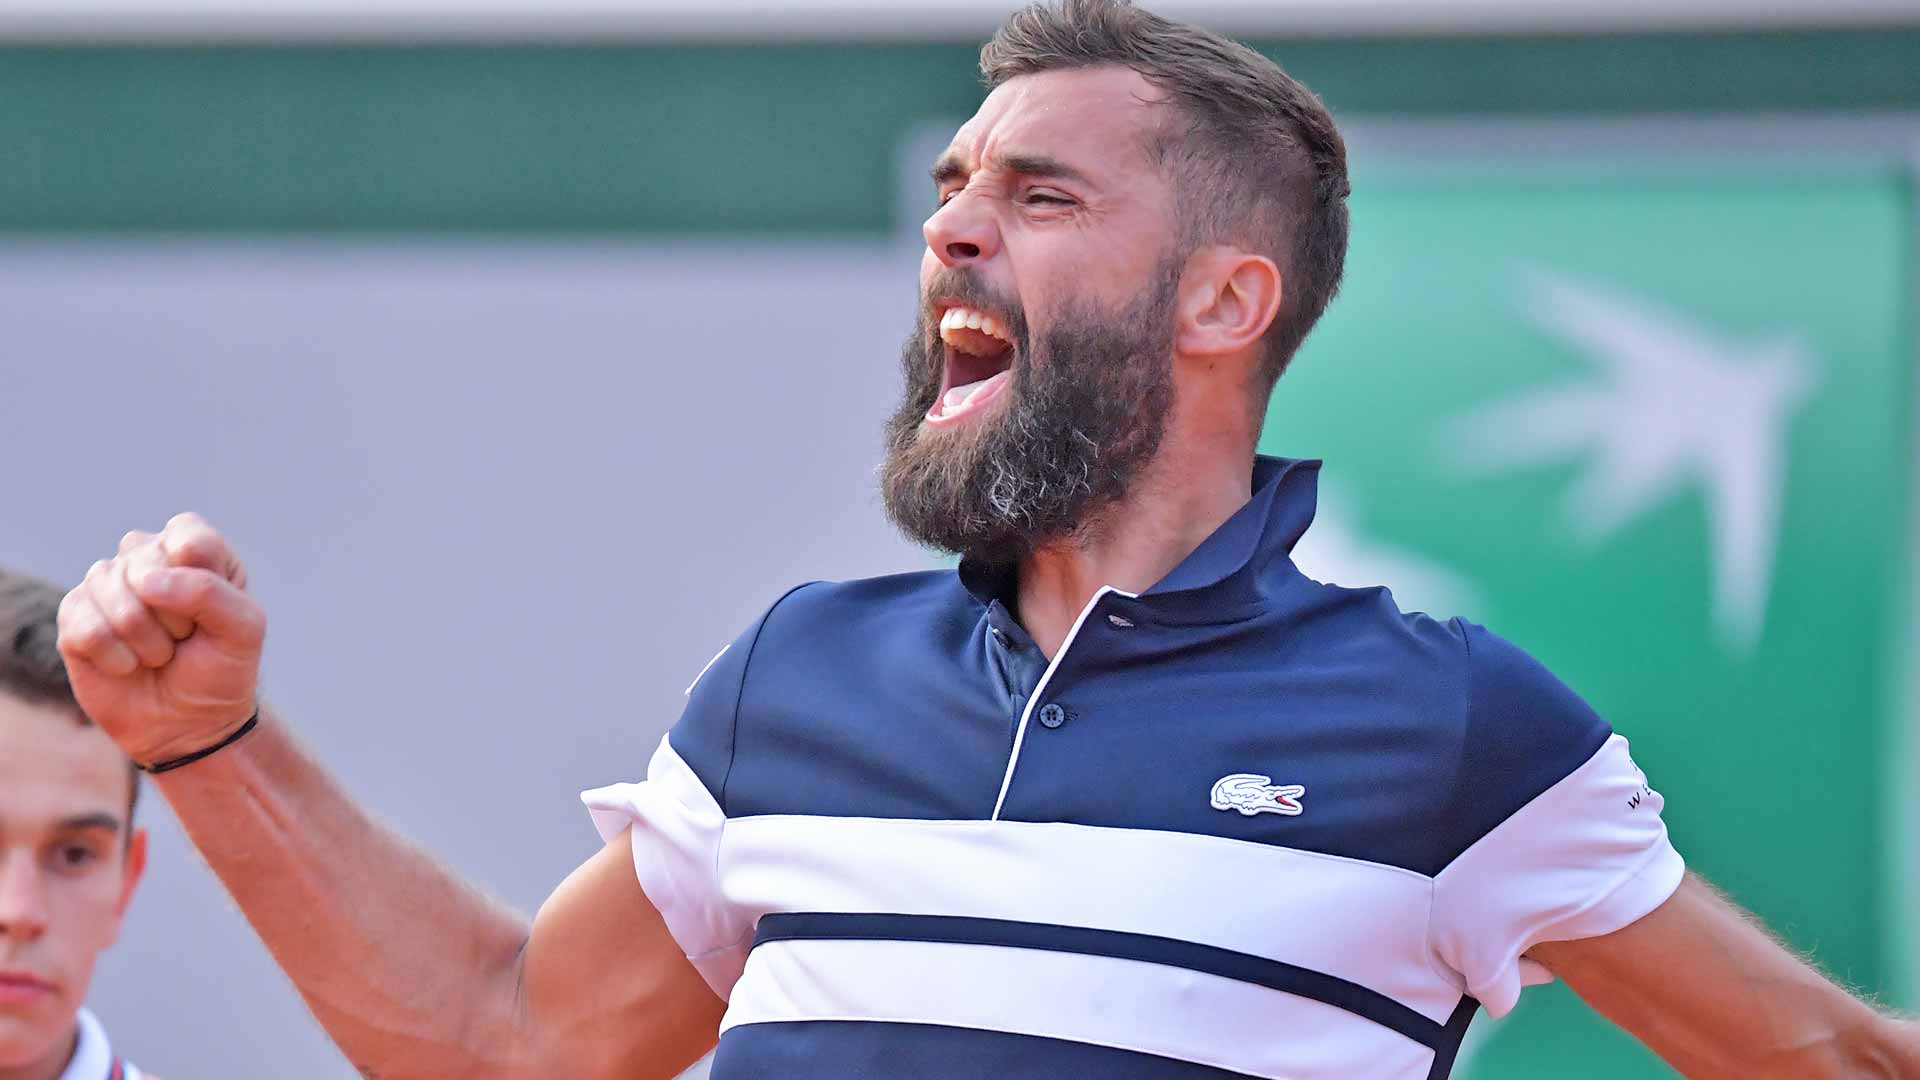 <a href='https://www.atptour.com/en/players/benoit-paire/pd31/overview'>Benoit Paire</a> celebrates after winning the second set from <a href='https://www.atptour.com/en/players/kei-nishikori/n552/overview'>Kei Nishikori</a> in their fourth-round match at <a href='https://www.atptour.com/en/tournaments/roland-garros/520/overview'>Roland Garros</a>.